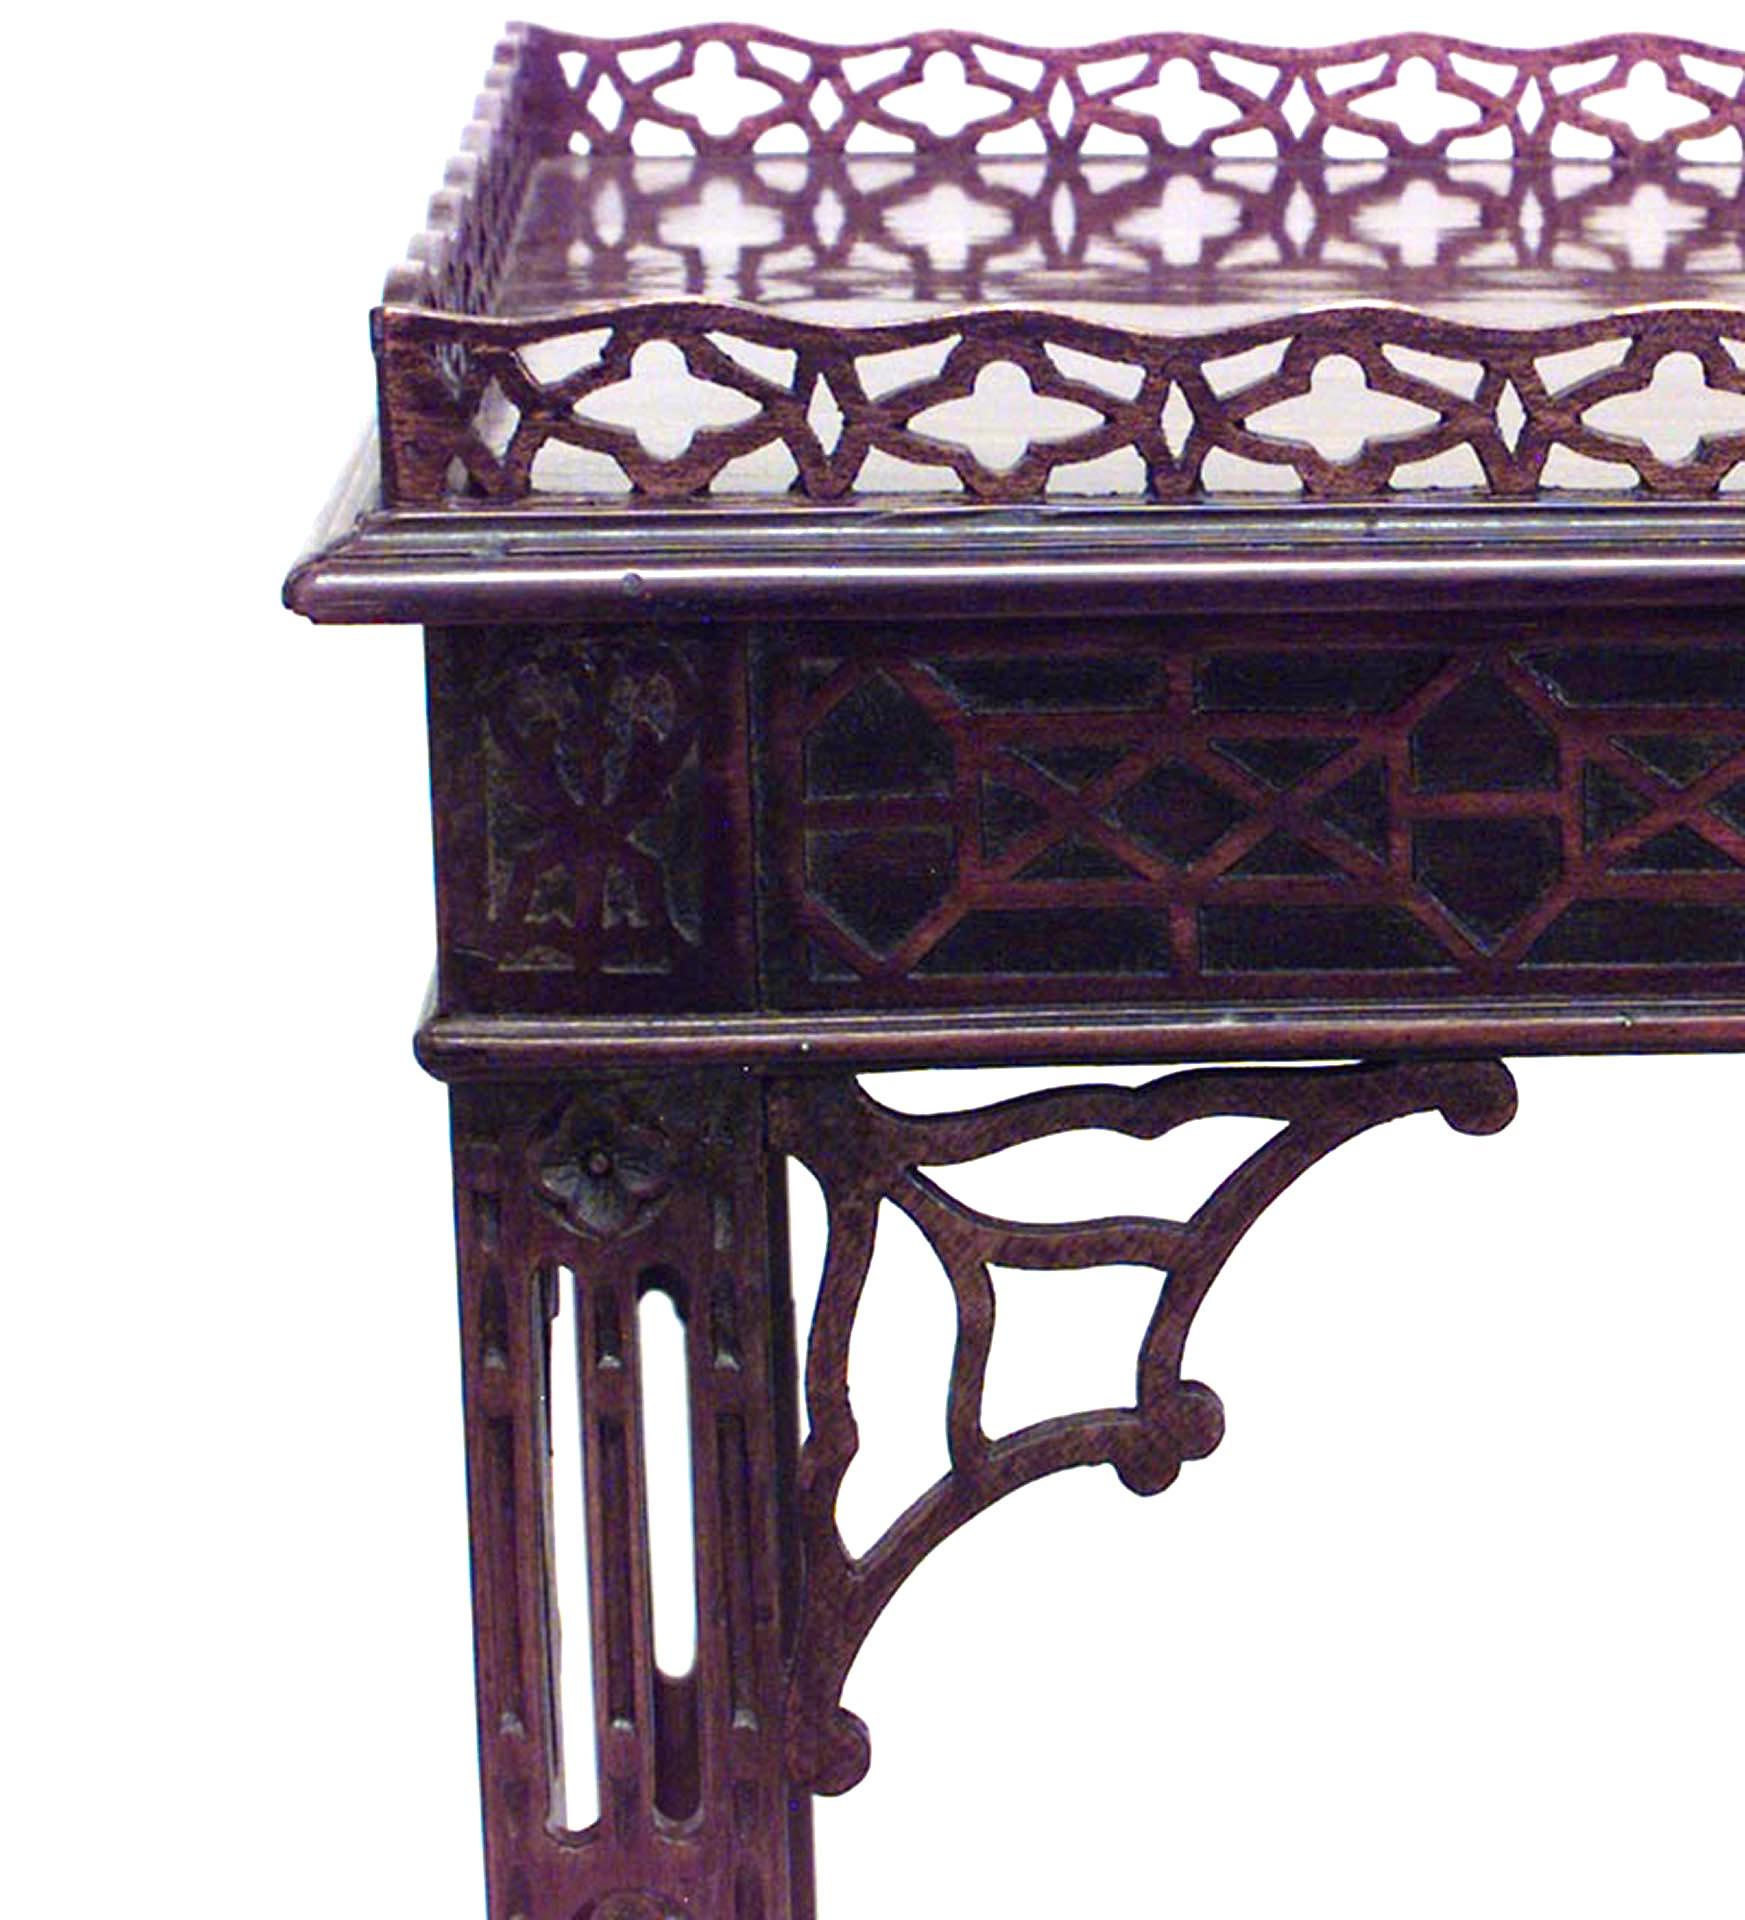 English Chinese Chippendale-style (Late 19th Century) mahogany silver table with pierced & blind fretwork, and an X stretcher supporting an under-tier with leather casters.
